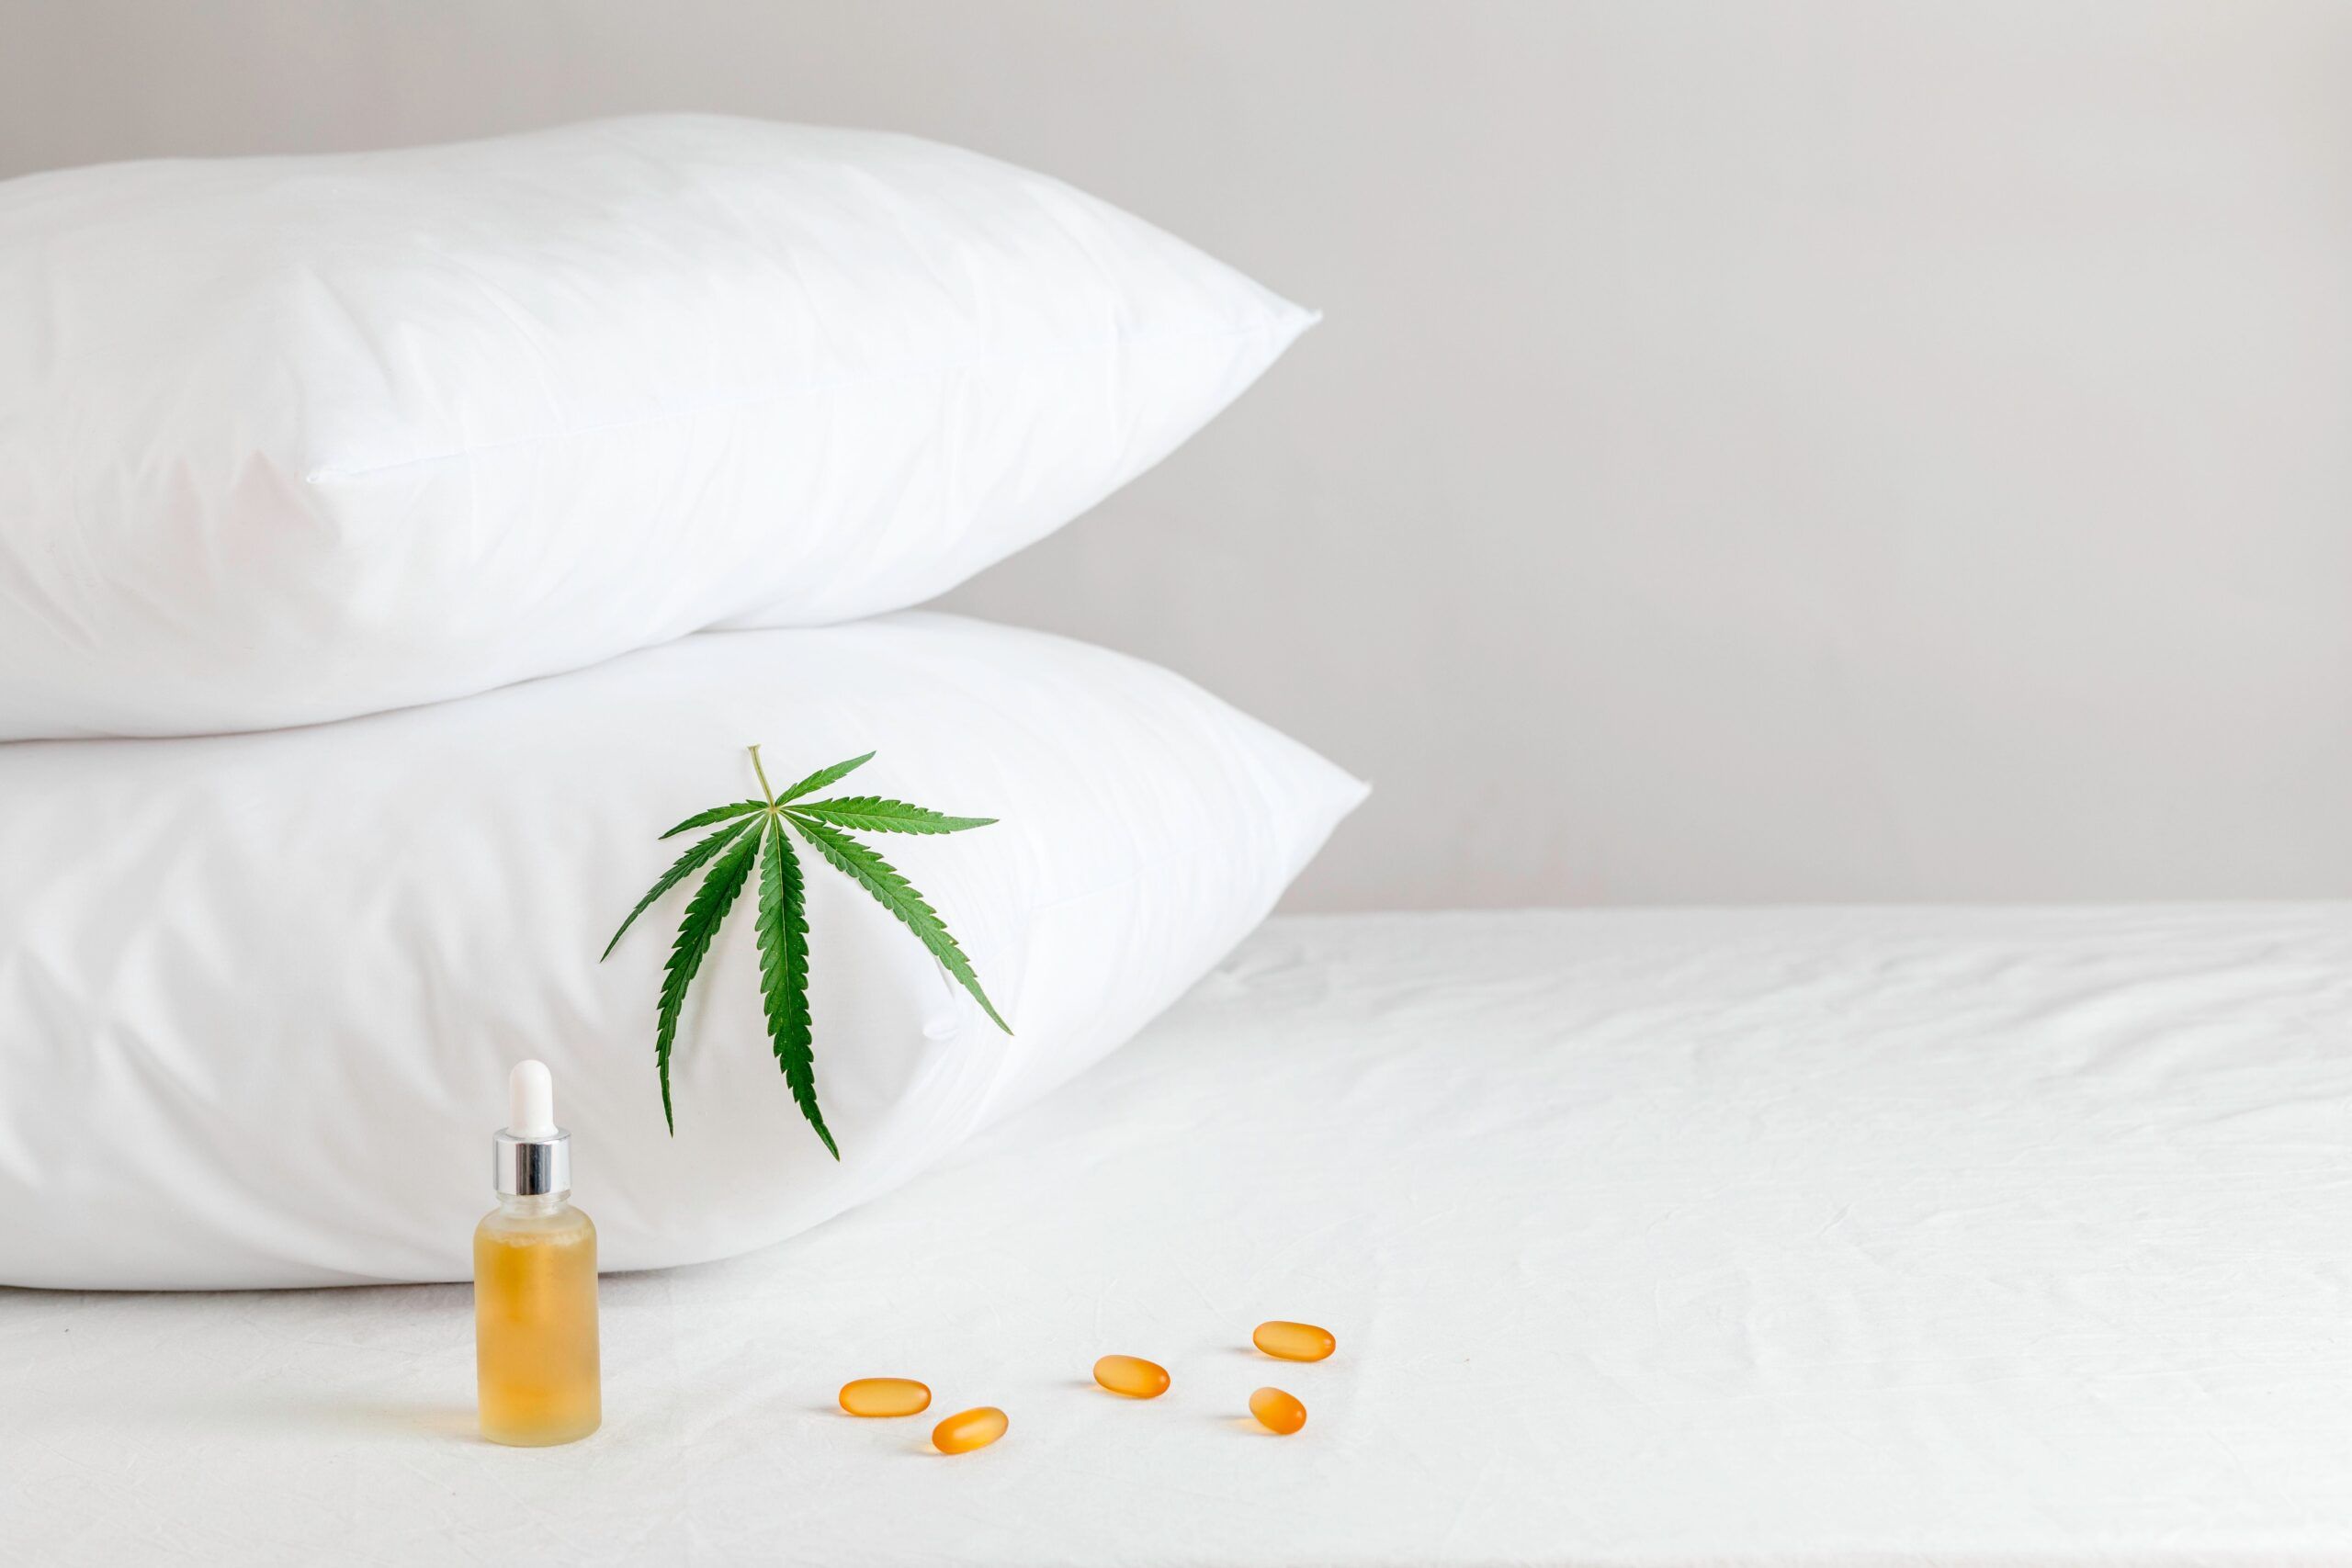 Melotonin production, pills, capsules and cbd oil on the bed. Concept sleep disorder. beat insomnia and restore sleeping routine.